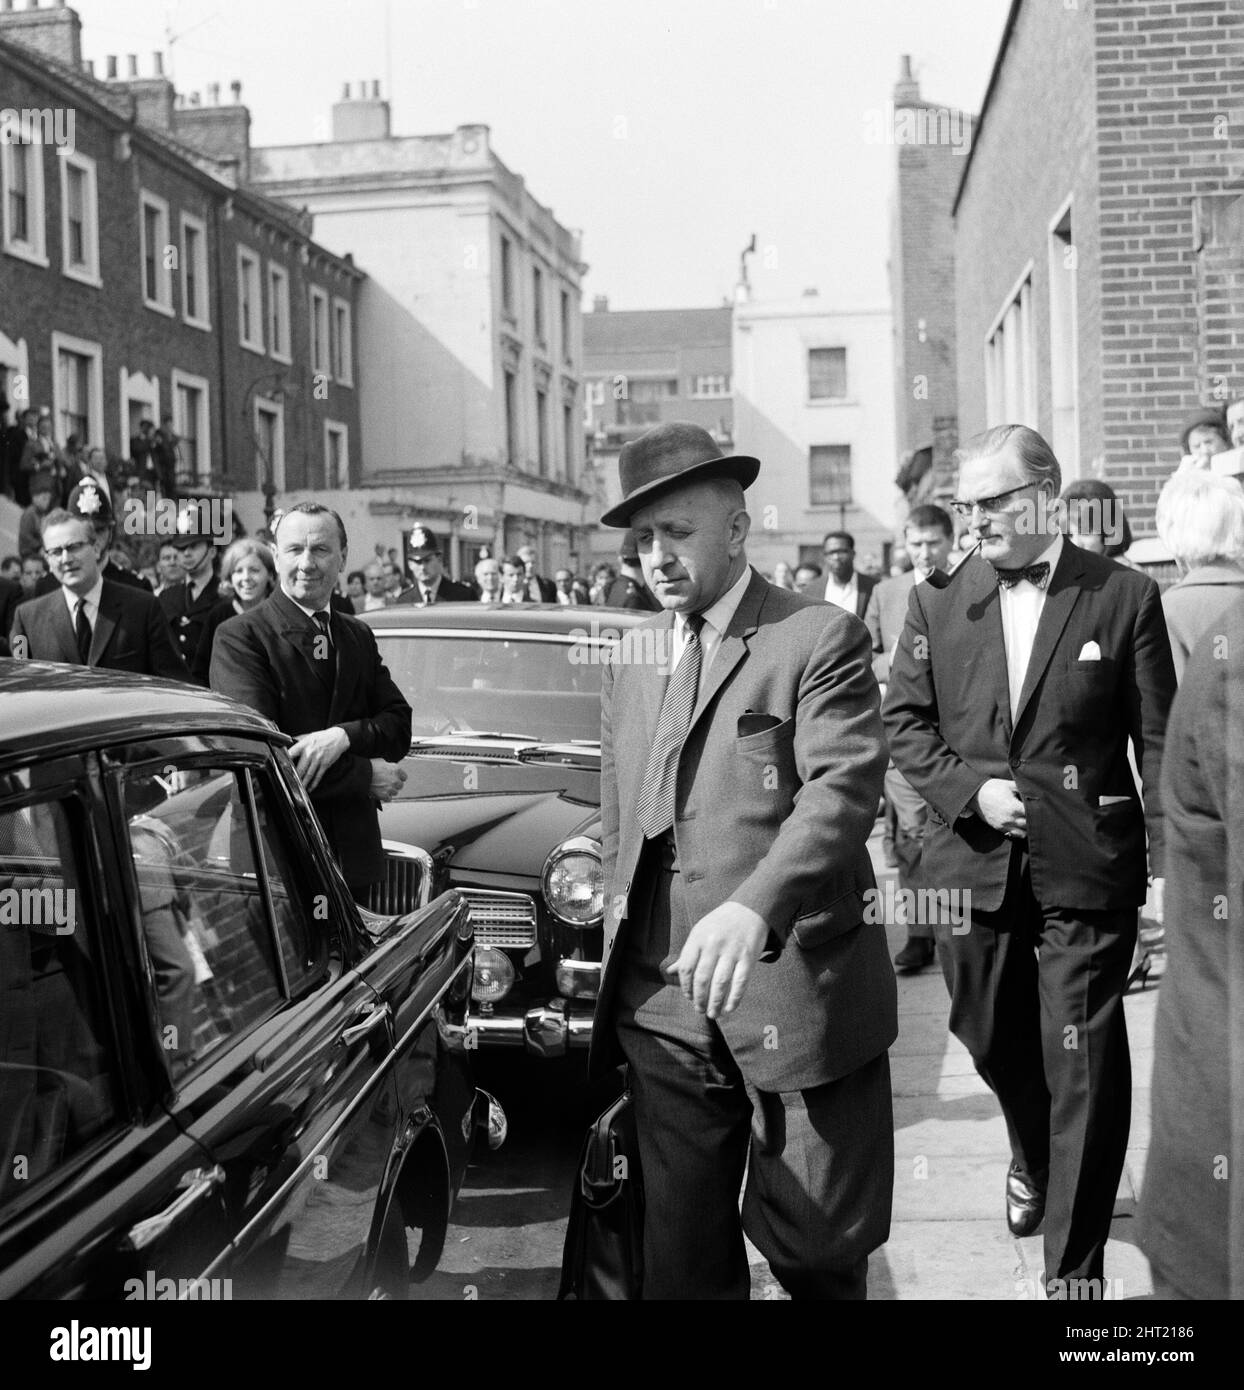 John Edward Witney, 36, who has been charged with the murder of 3 police officers, was taken from Shepherds Bush police station (the murder HQ) and driven to West London Magistrate Court, where he made a brief appearance and was remanded in custody until August 23. Pictured is Detective Superintendent Richard Chitty. 16th August 1966. Stock Photo